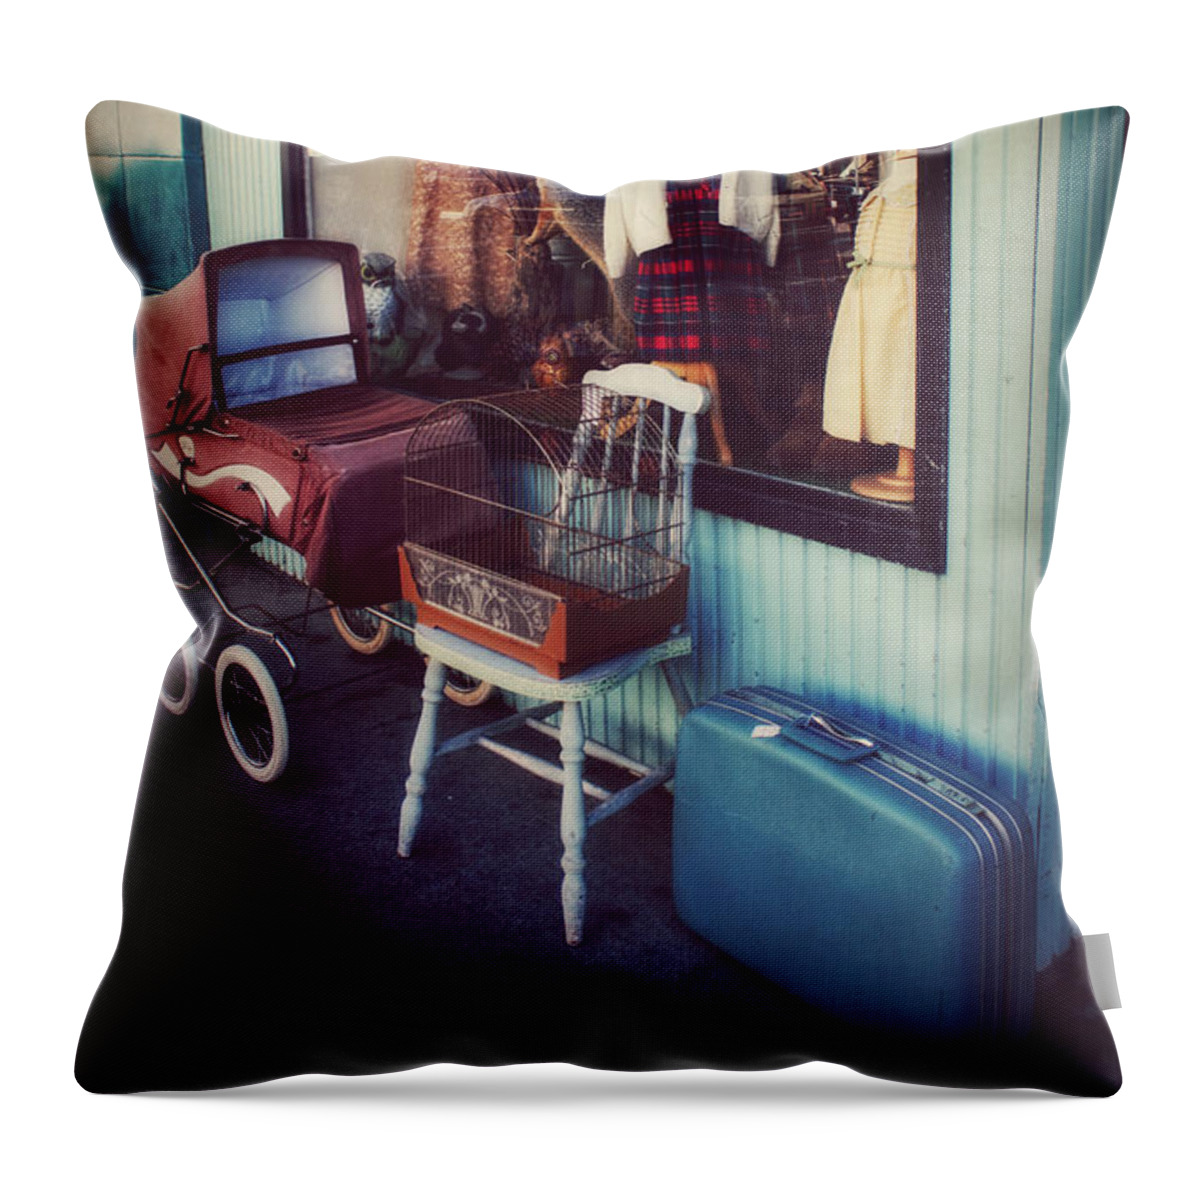 Vintage Throw Pillow featuring the photograph Vintage Memories by Melanie Lankford Photography